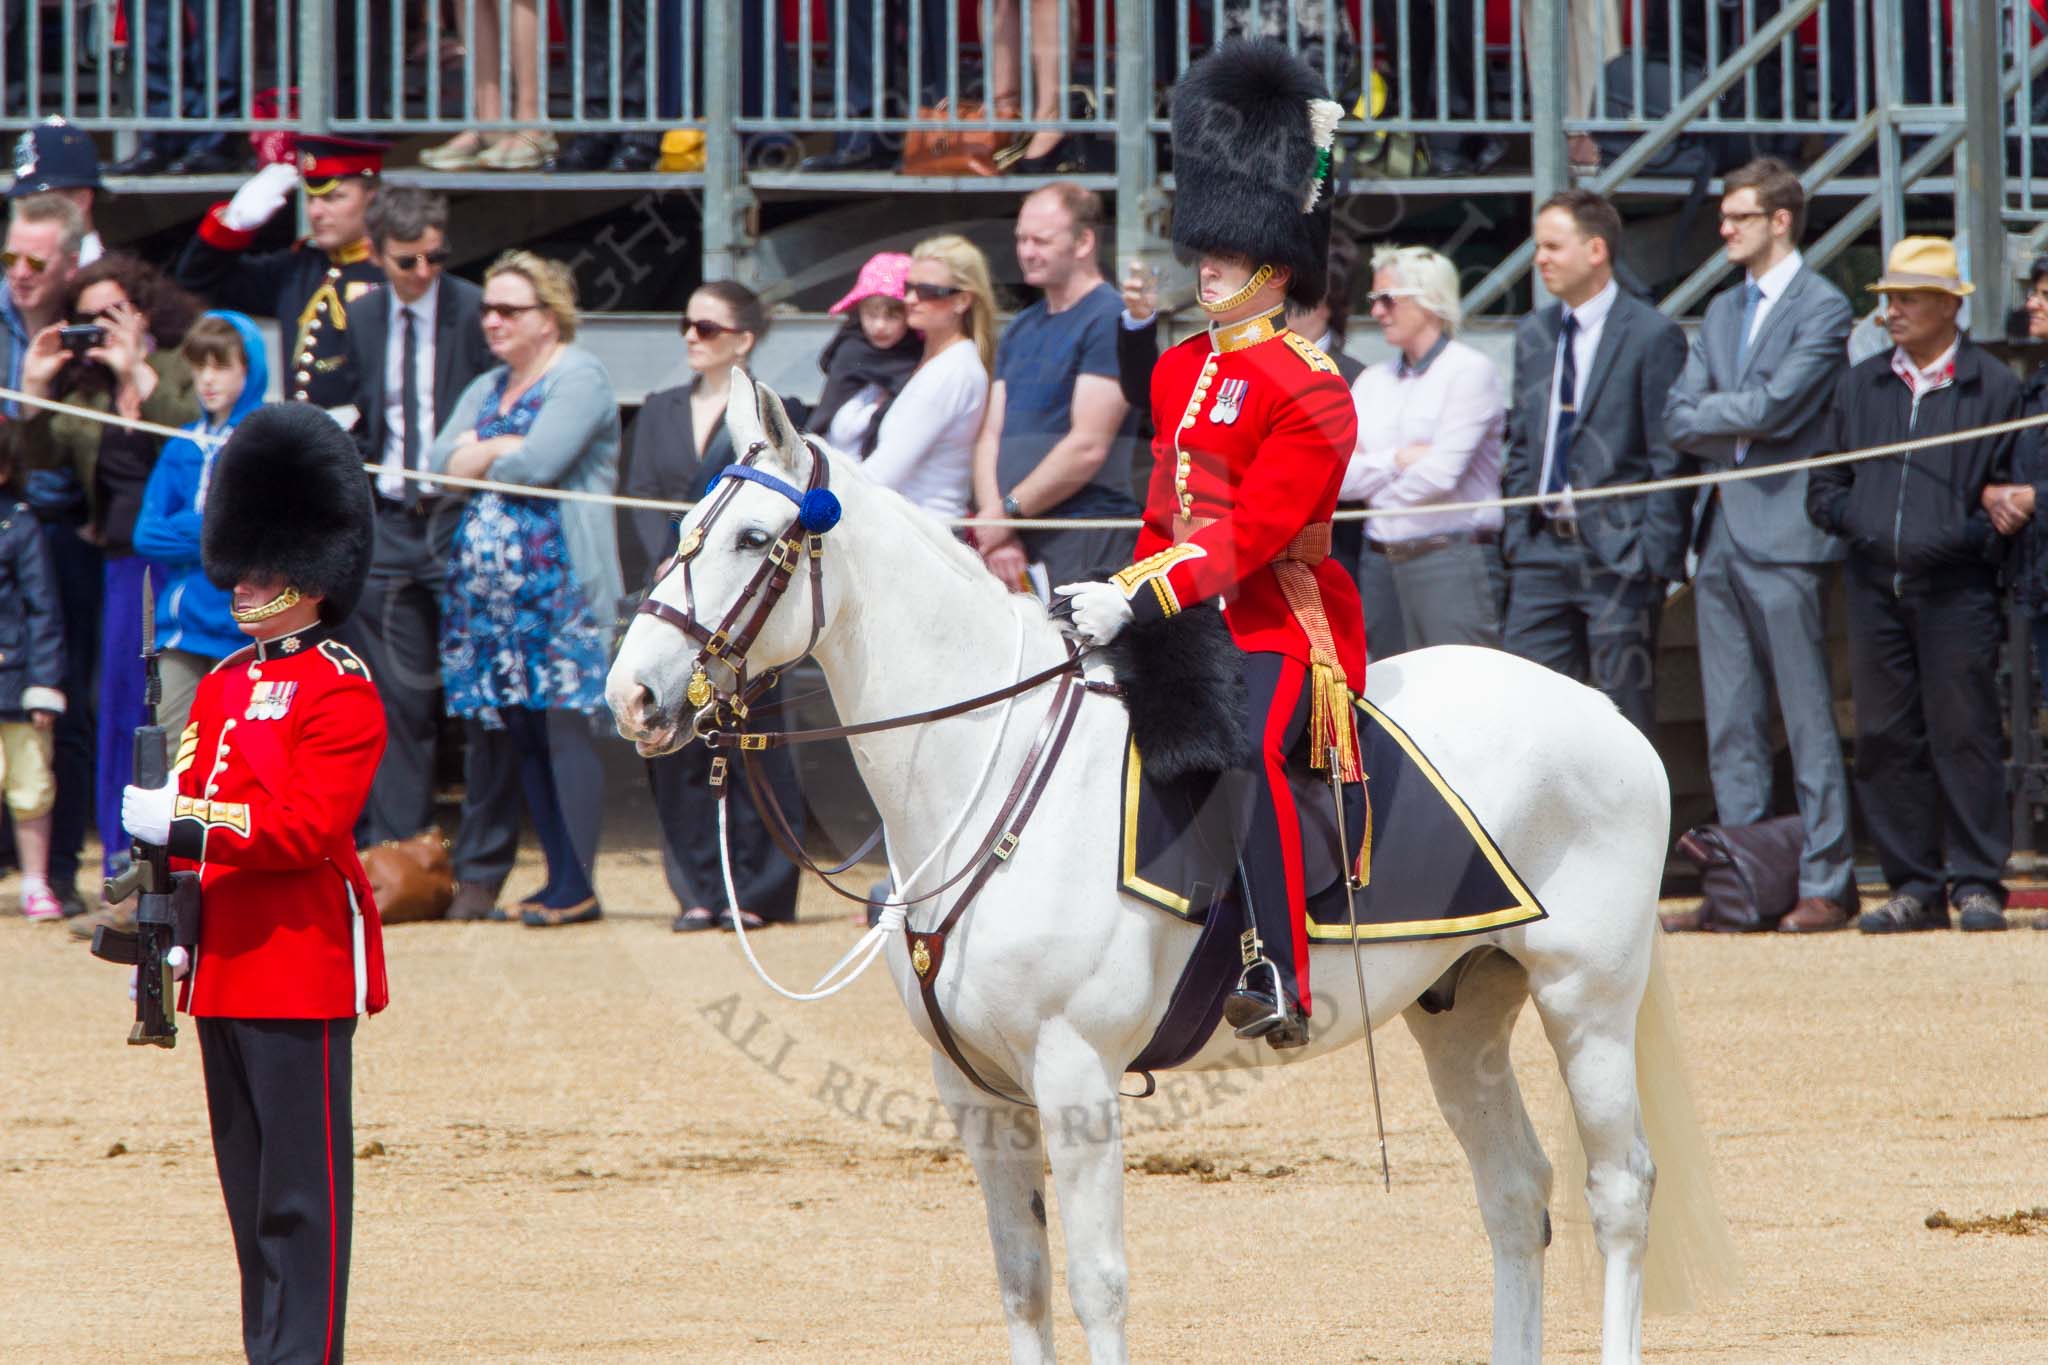 The Colonel's Review 2013.
Horse Guards Parade, Westminster,
London SW1,

United Kingdom,
on 08 June 2013 at 11:24, image #568